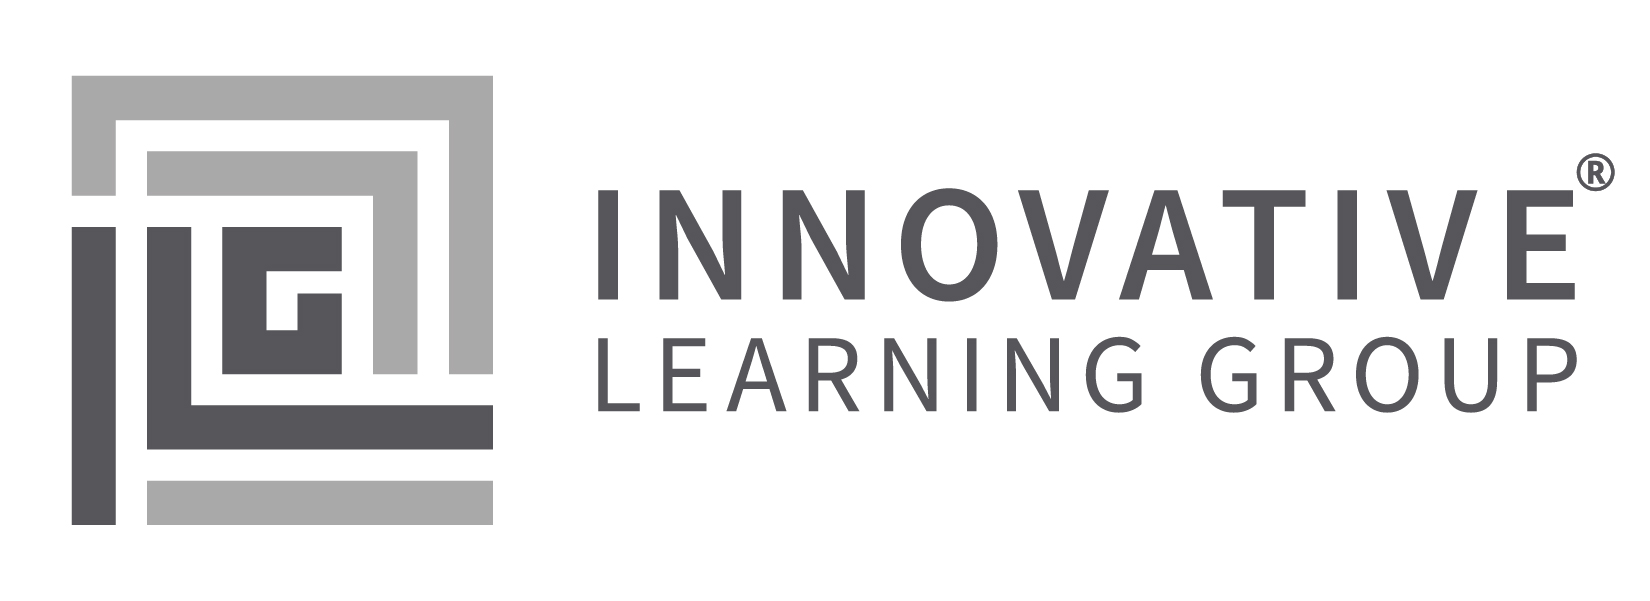 Innovative Learning Group